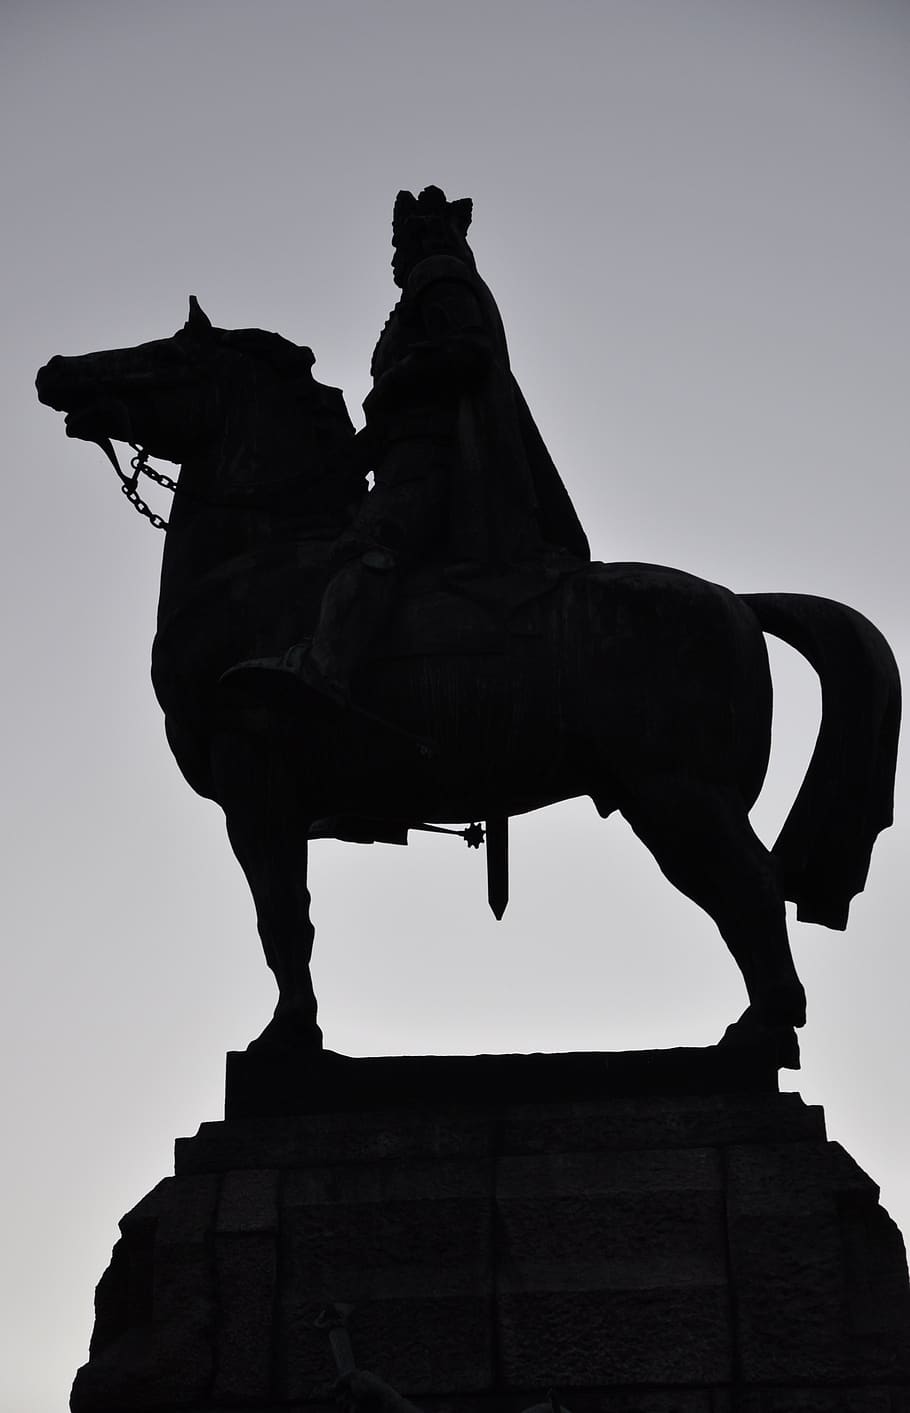 monument, king, the horse, rider, kraków, art and craft, sculpture, representation, statue, sky